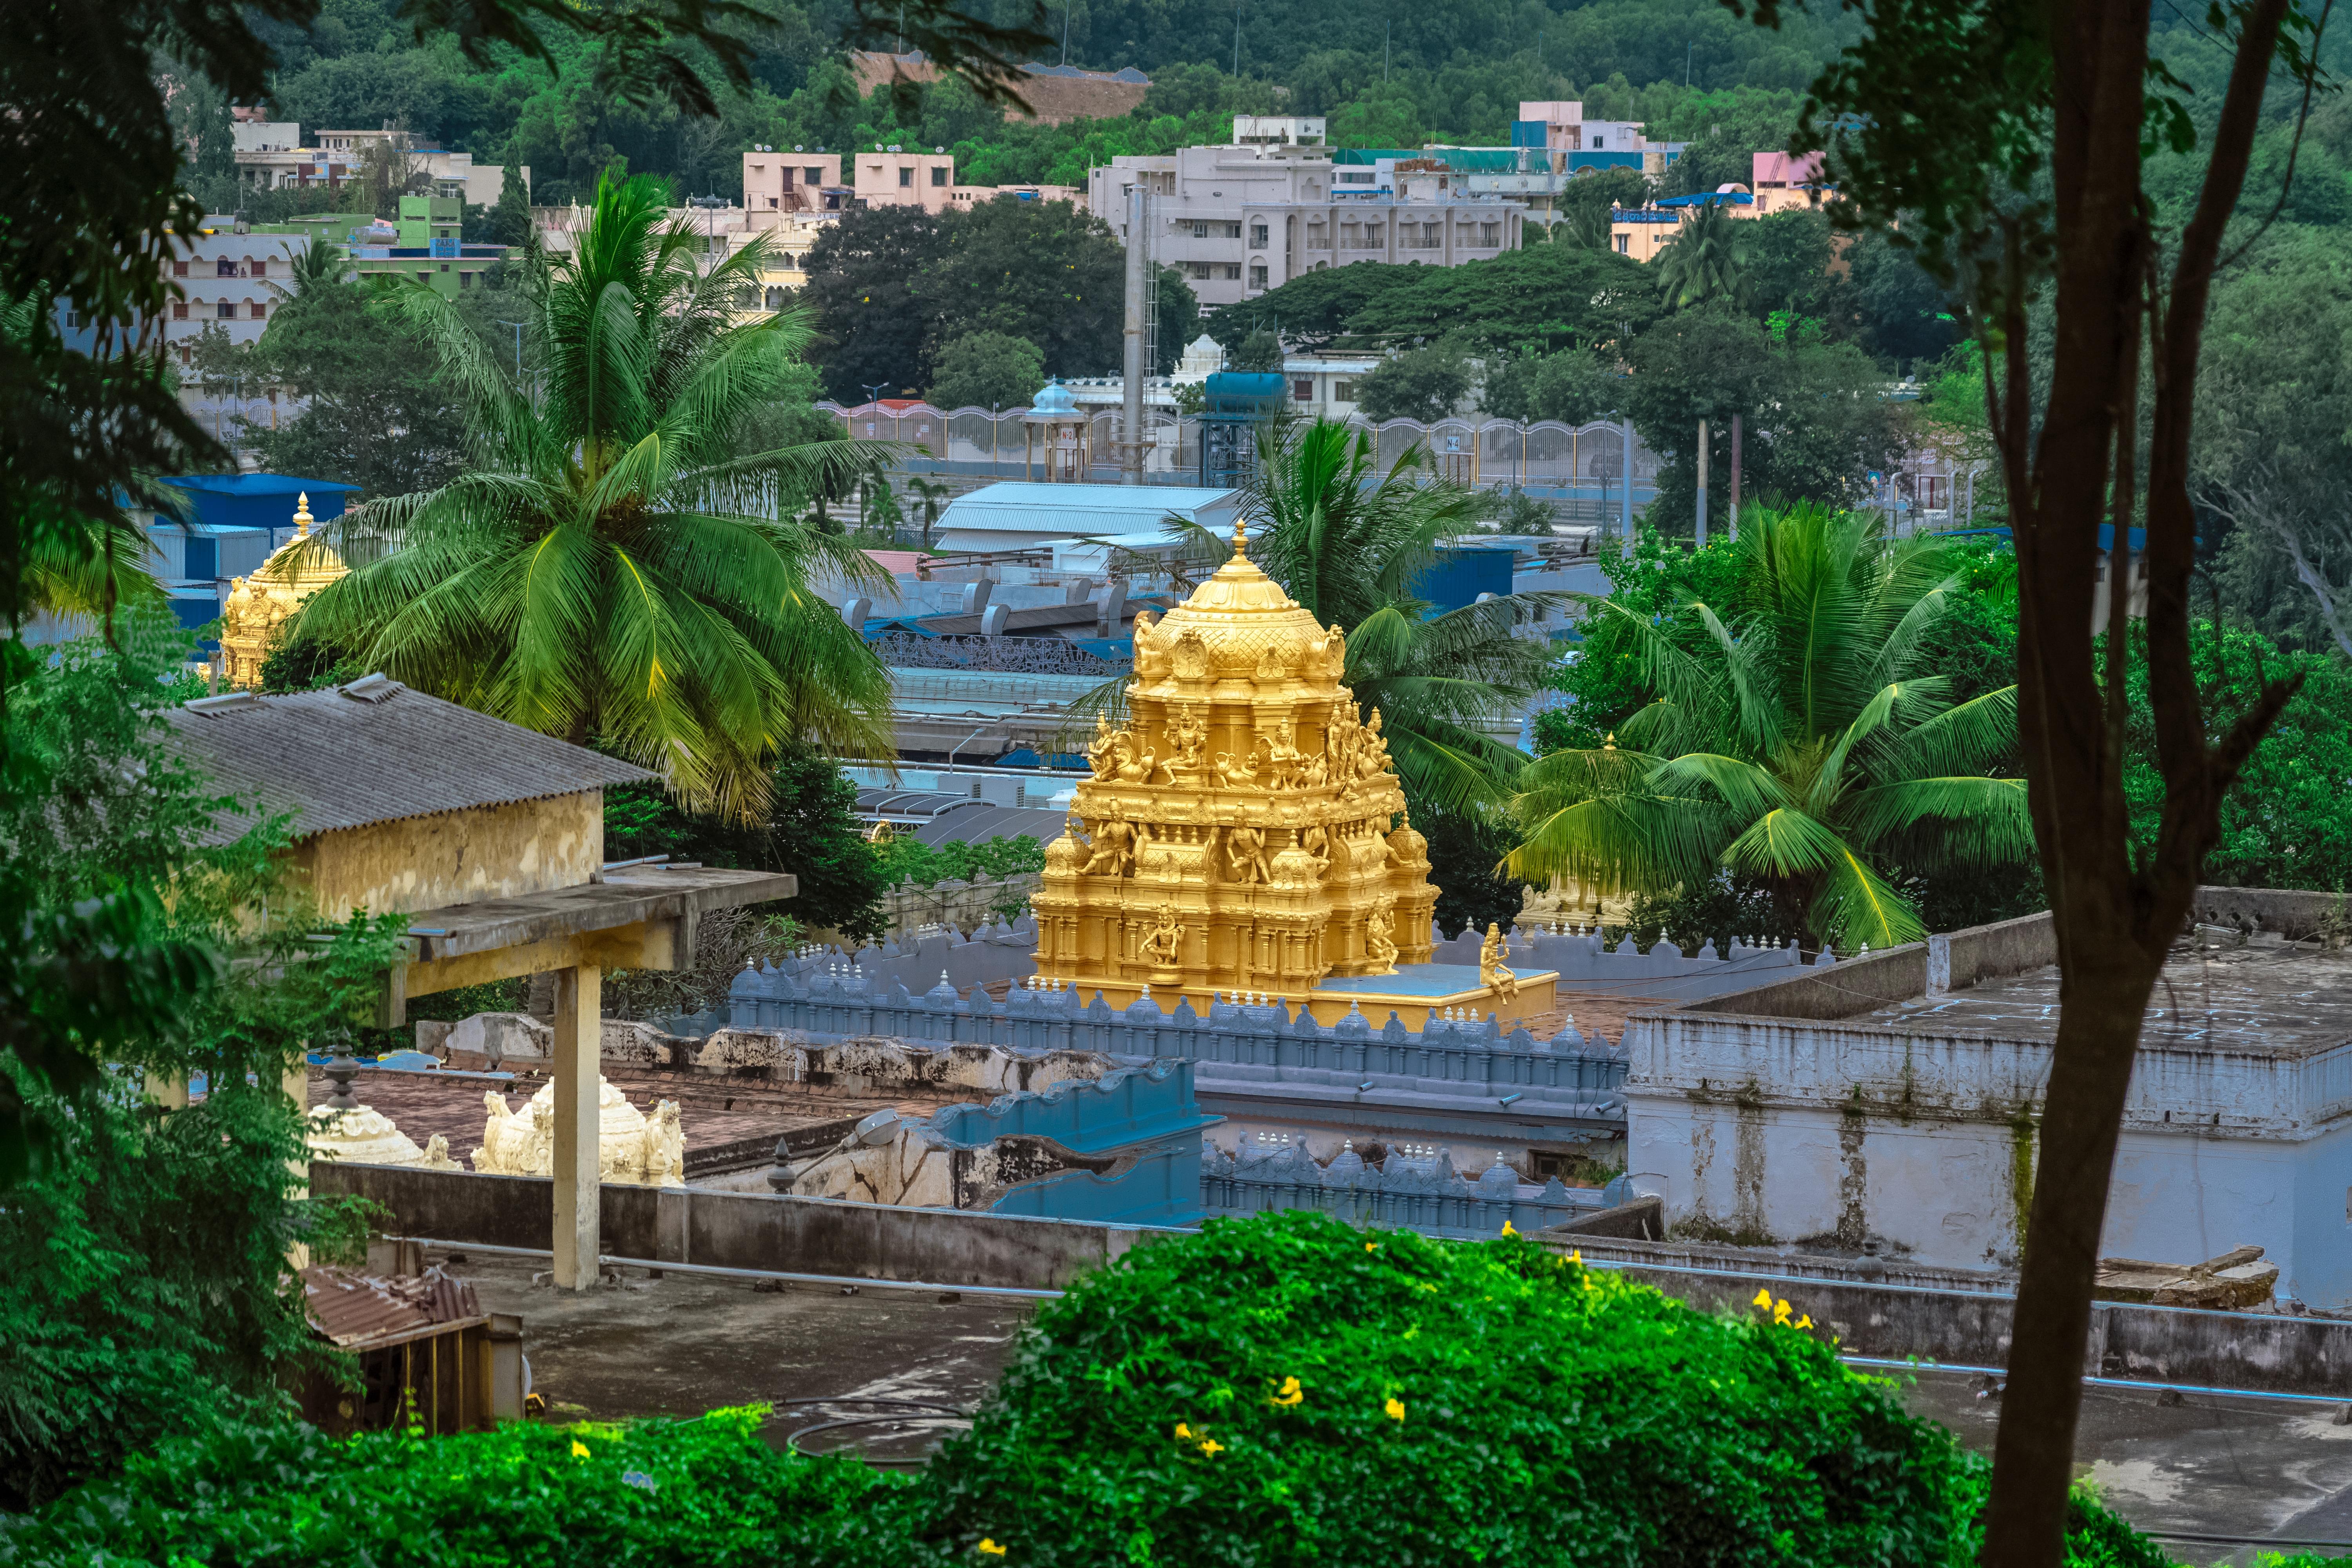 Tamil Nadu Packages from Guwahati | Get Upto 40% Off